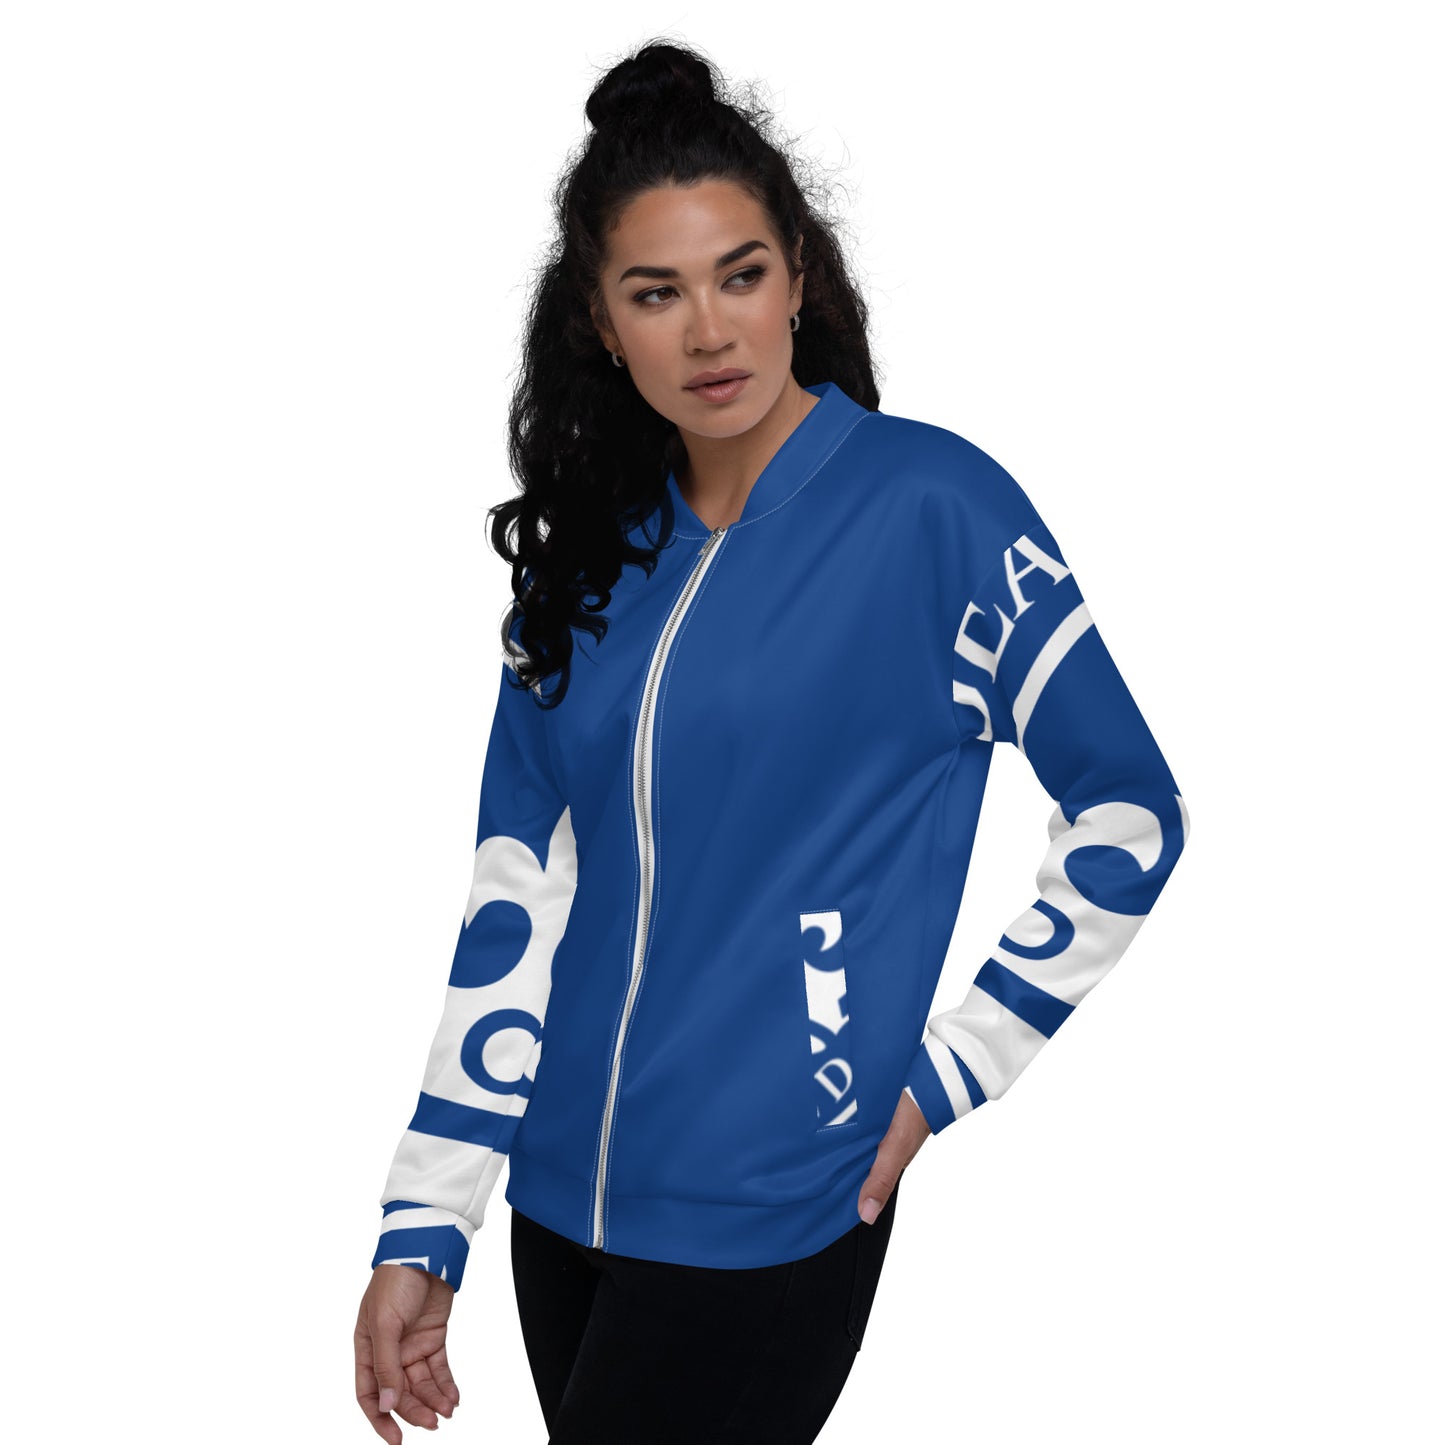 Royal Blue and White Pageant Life Certified Unisex Bomber Jacket